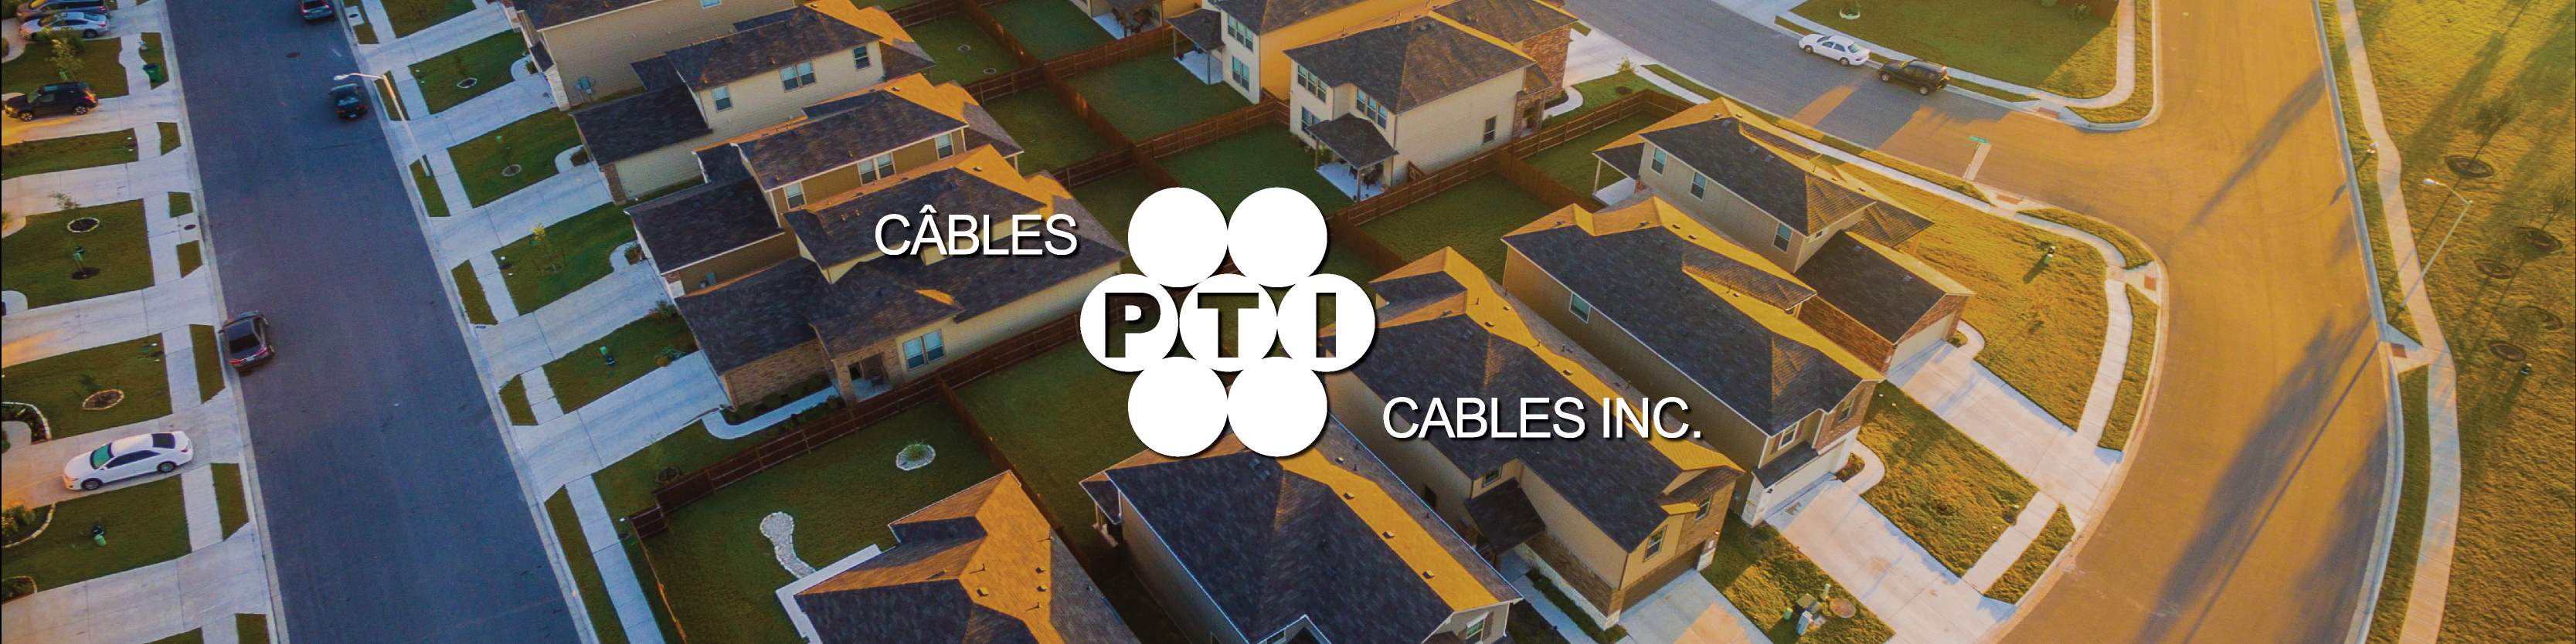 Featured Suppliers Banner Image - PTI Cables